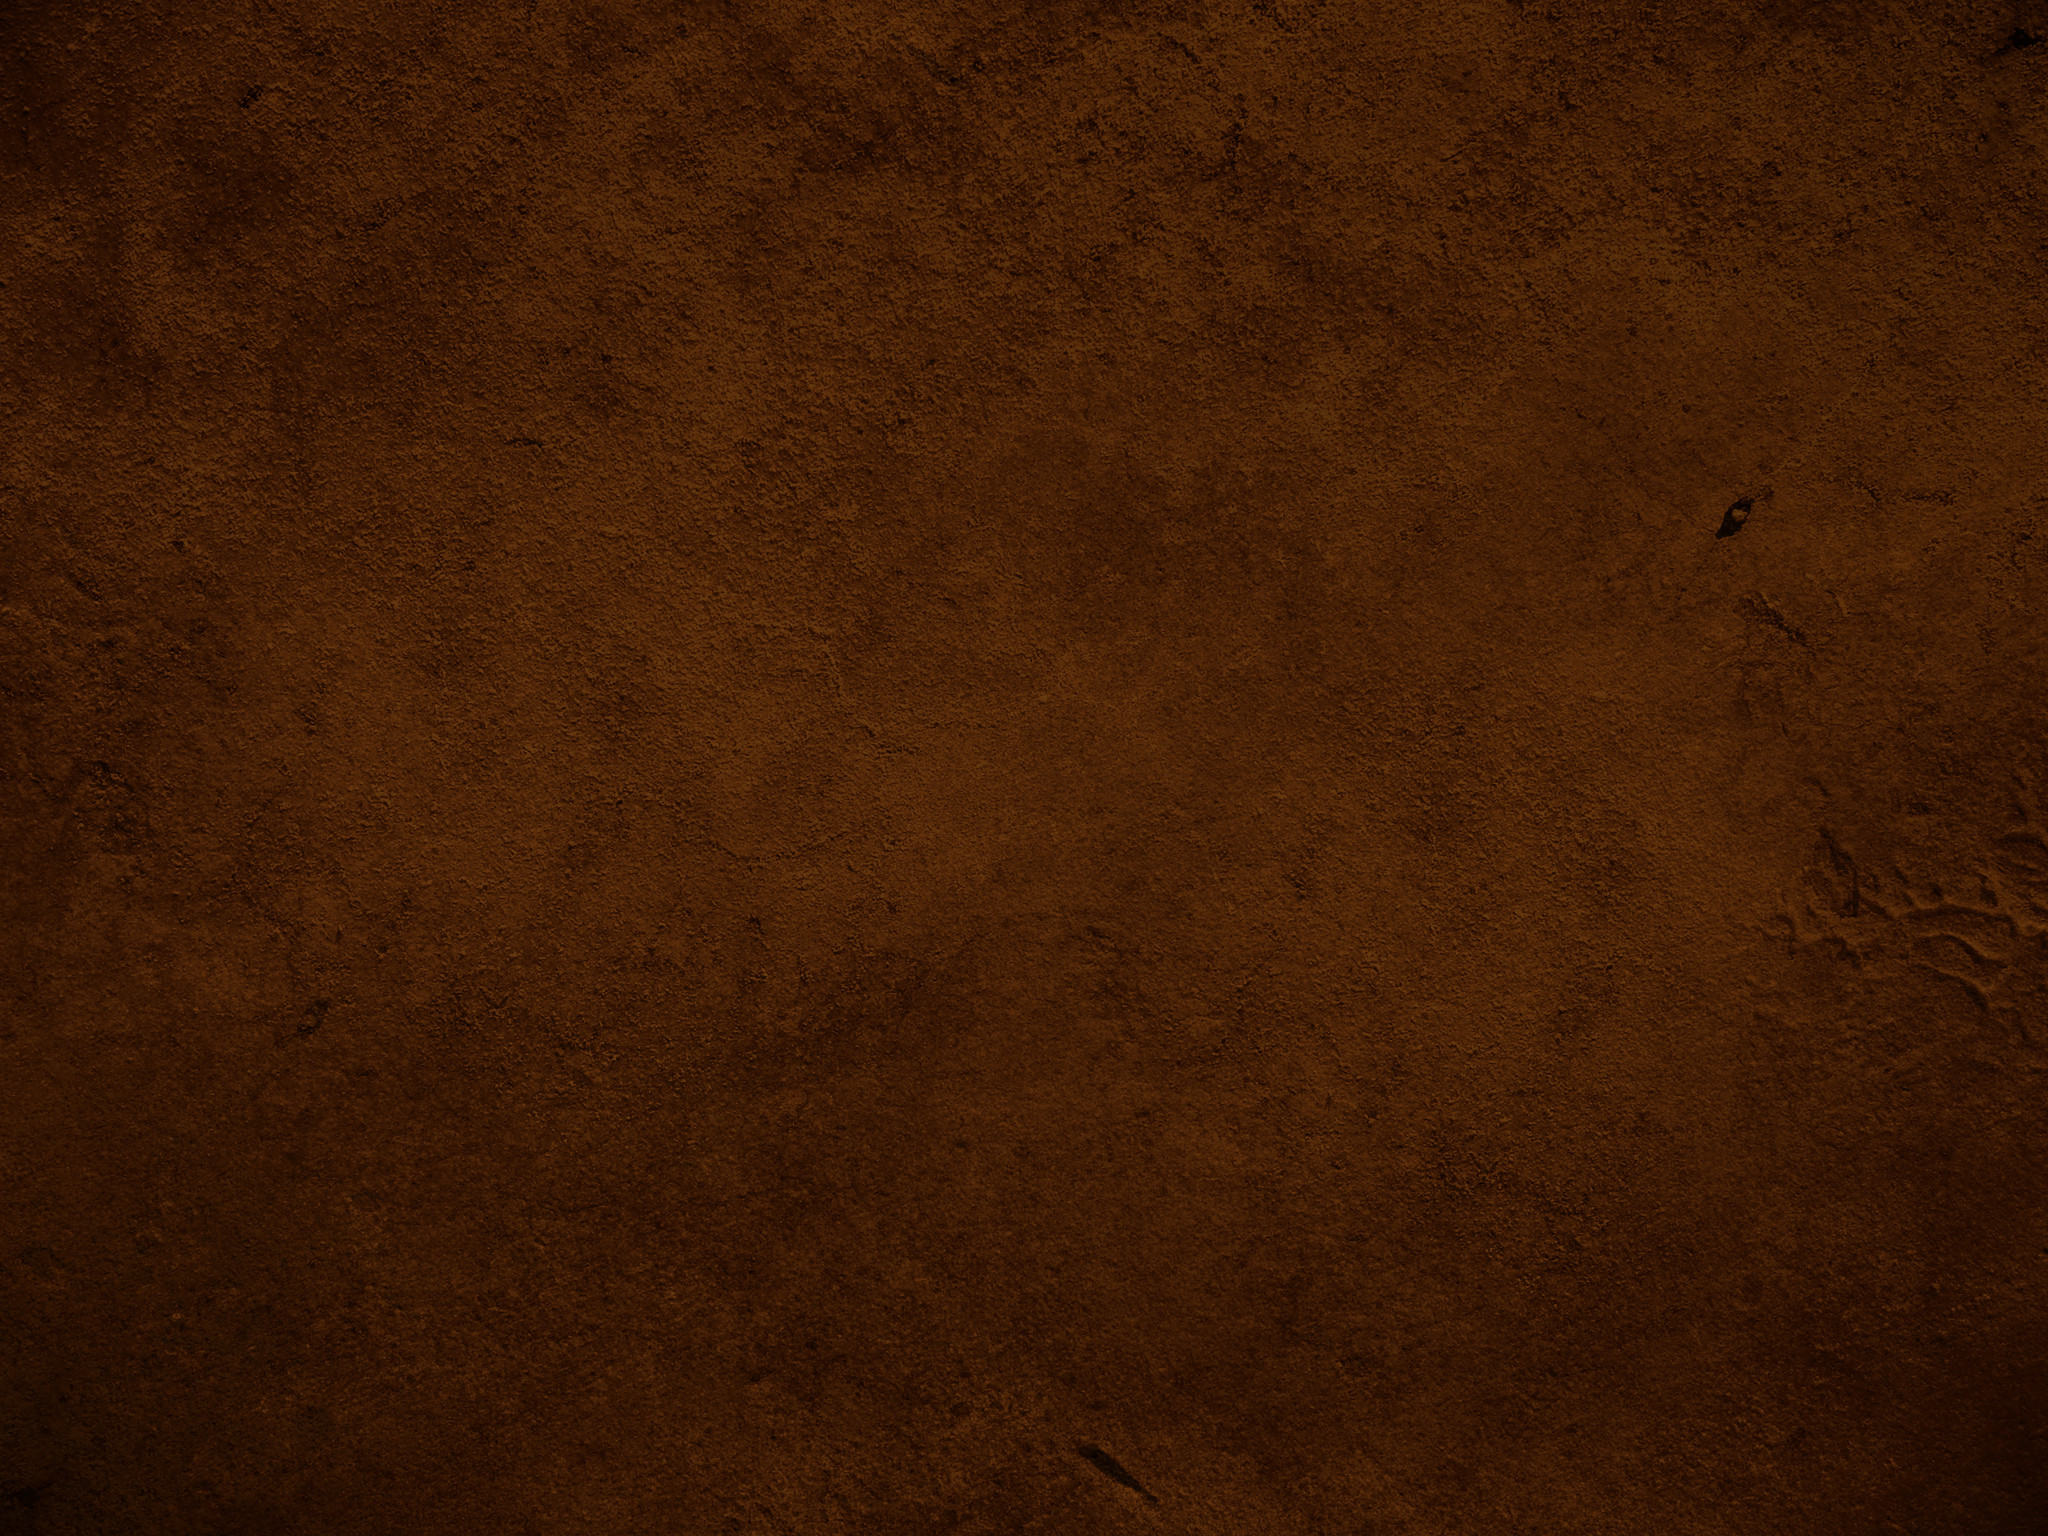 Brown Backgrounds